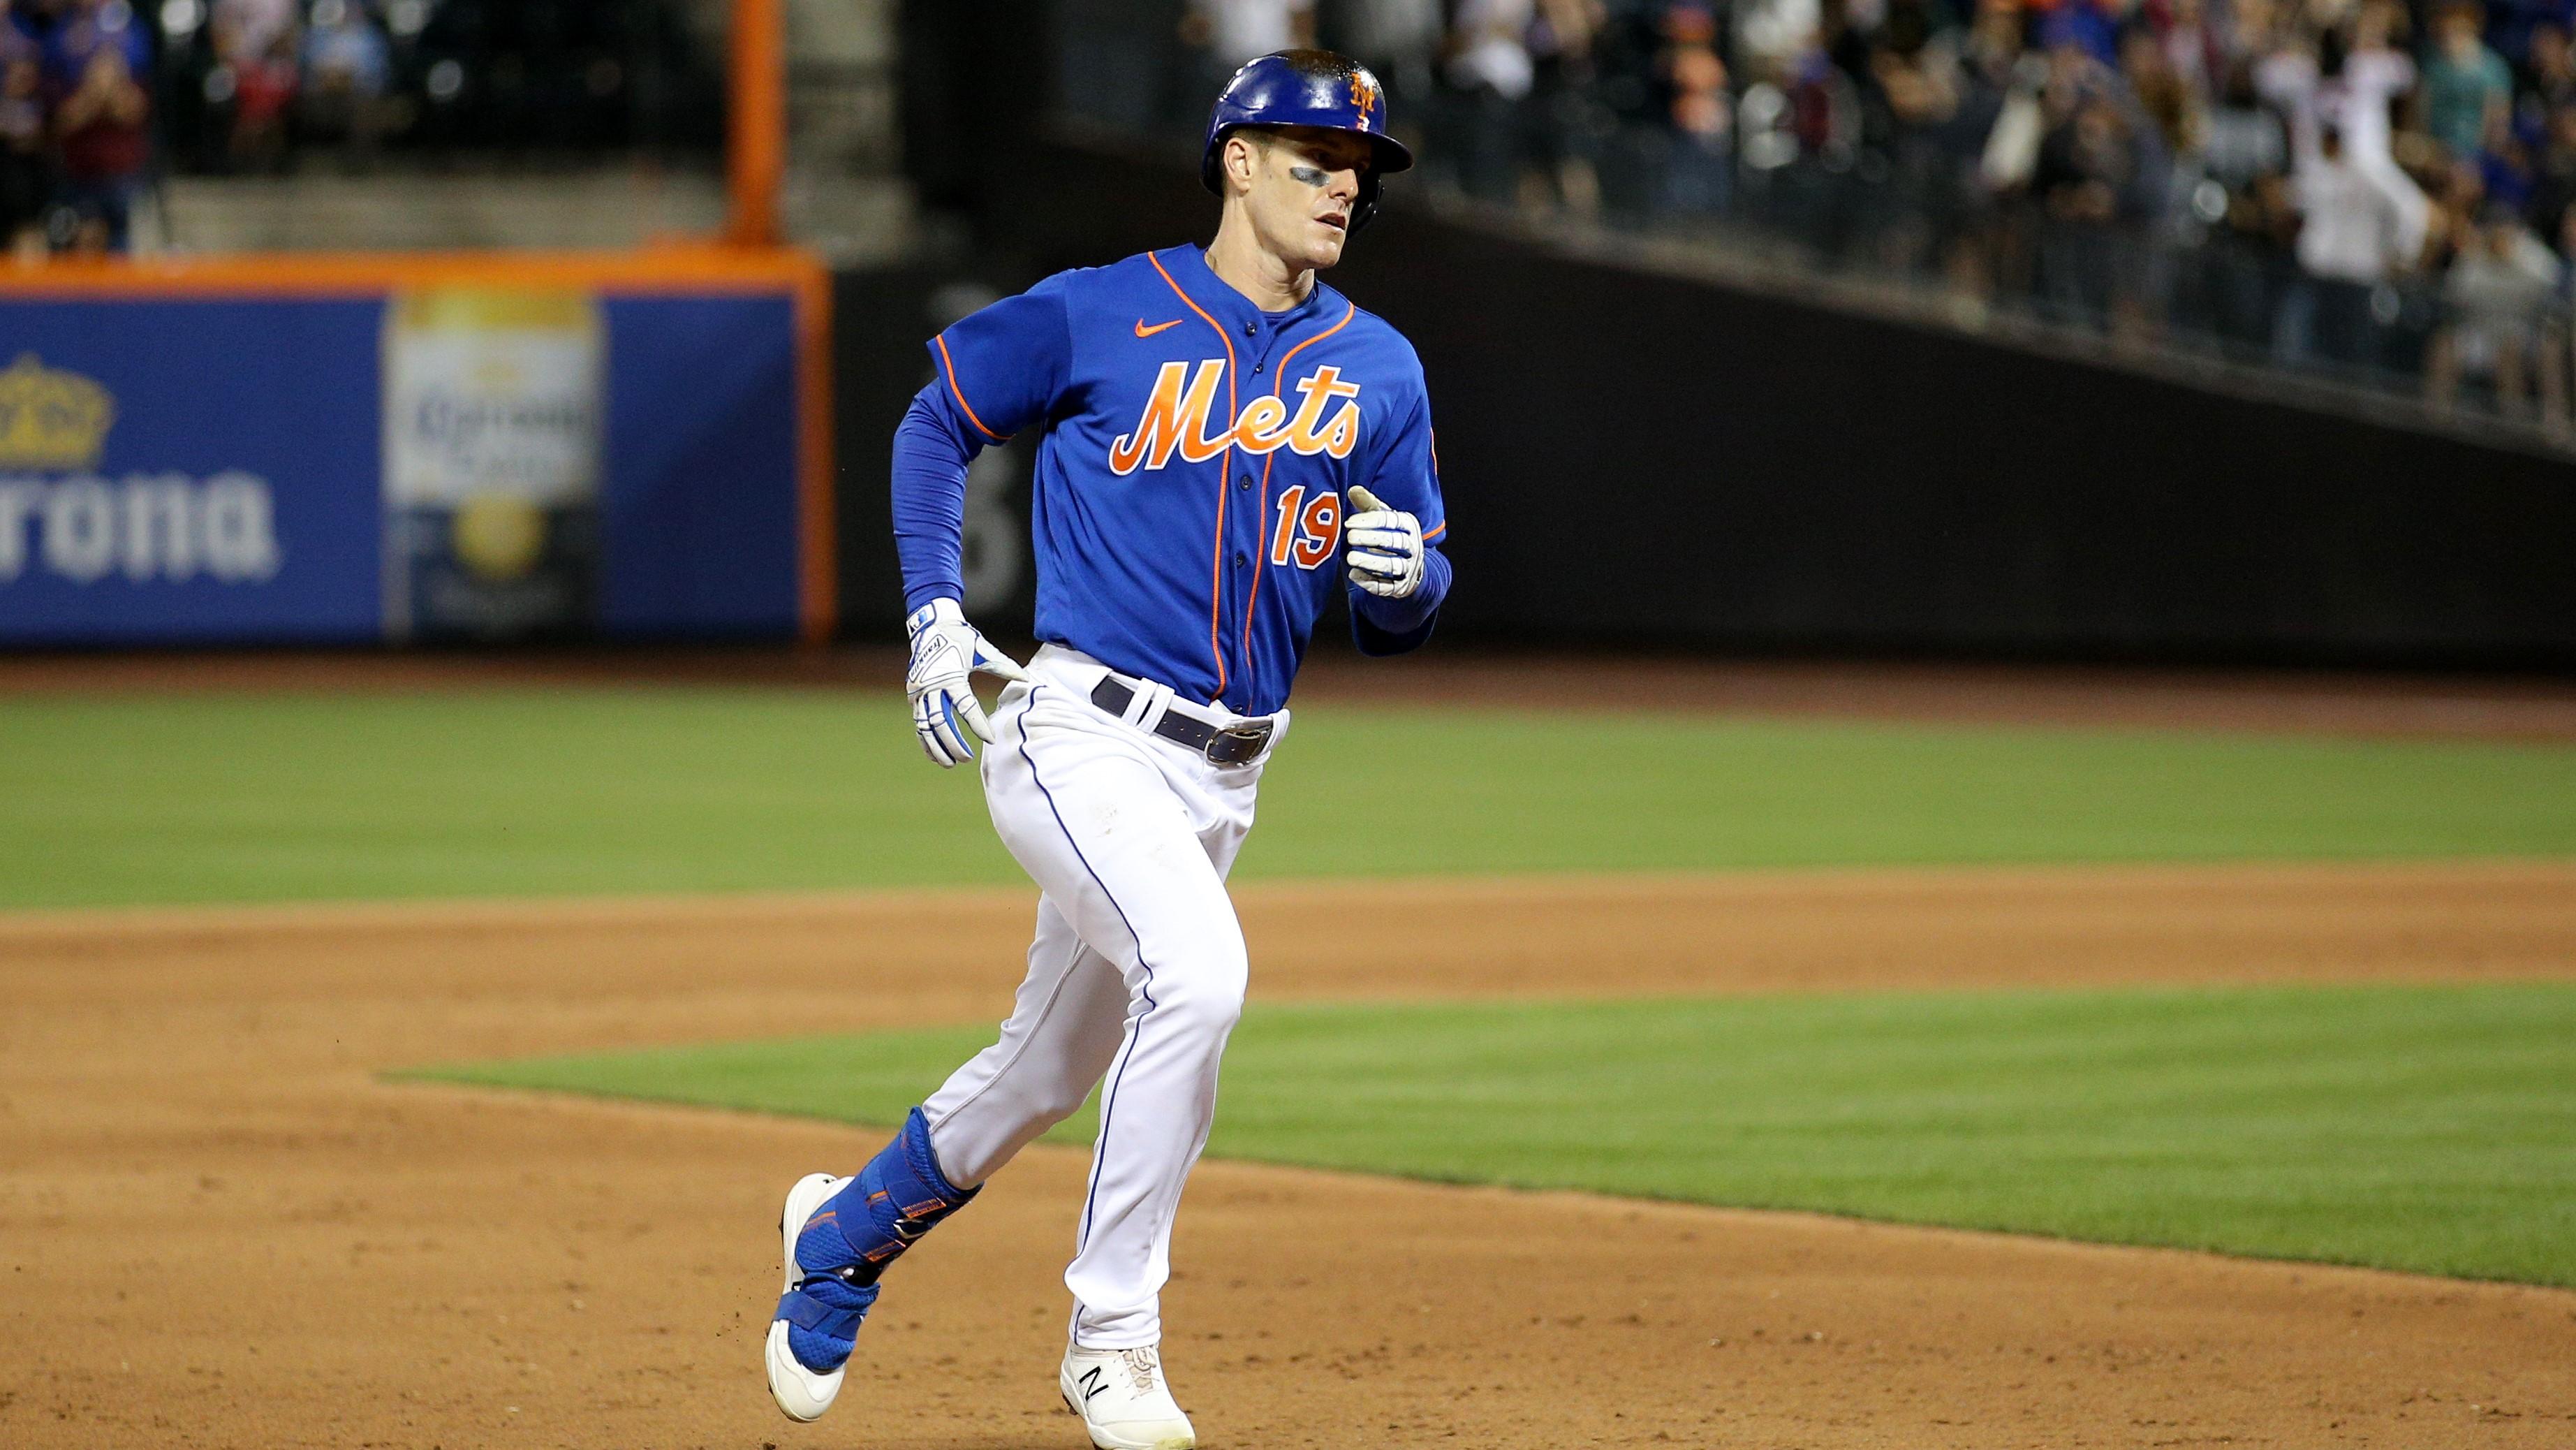 New York Mets left fielder Mark Canha (19) rounds the bases after hitting a two run home run against the Milwaukee Brewers during the fifth inning at Citi Field. / Brad Penner-USA TODAY Sports